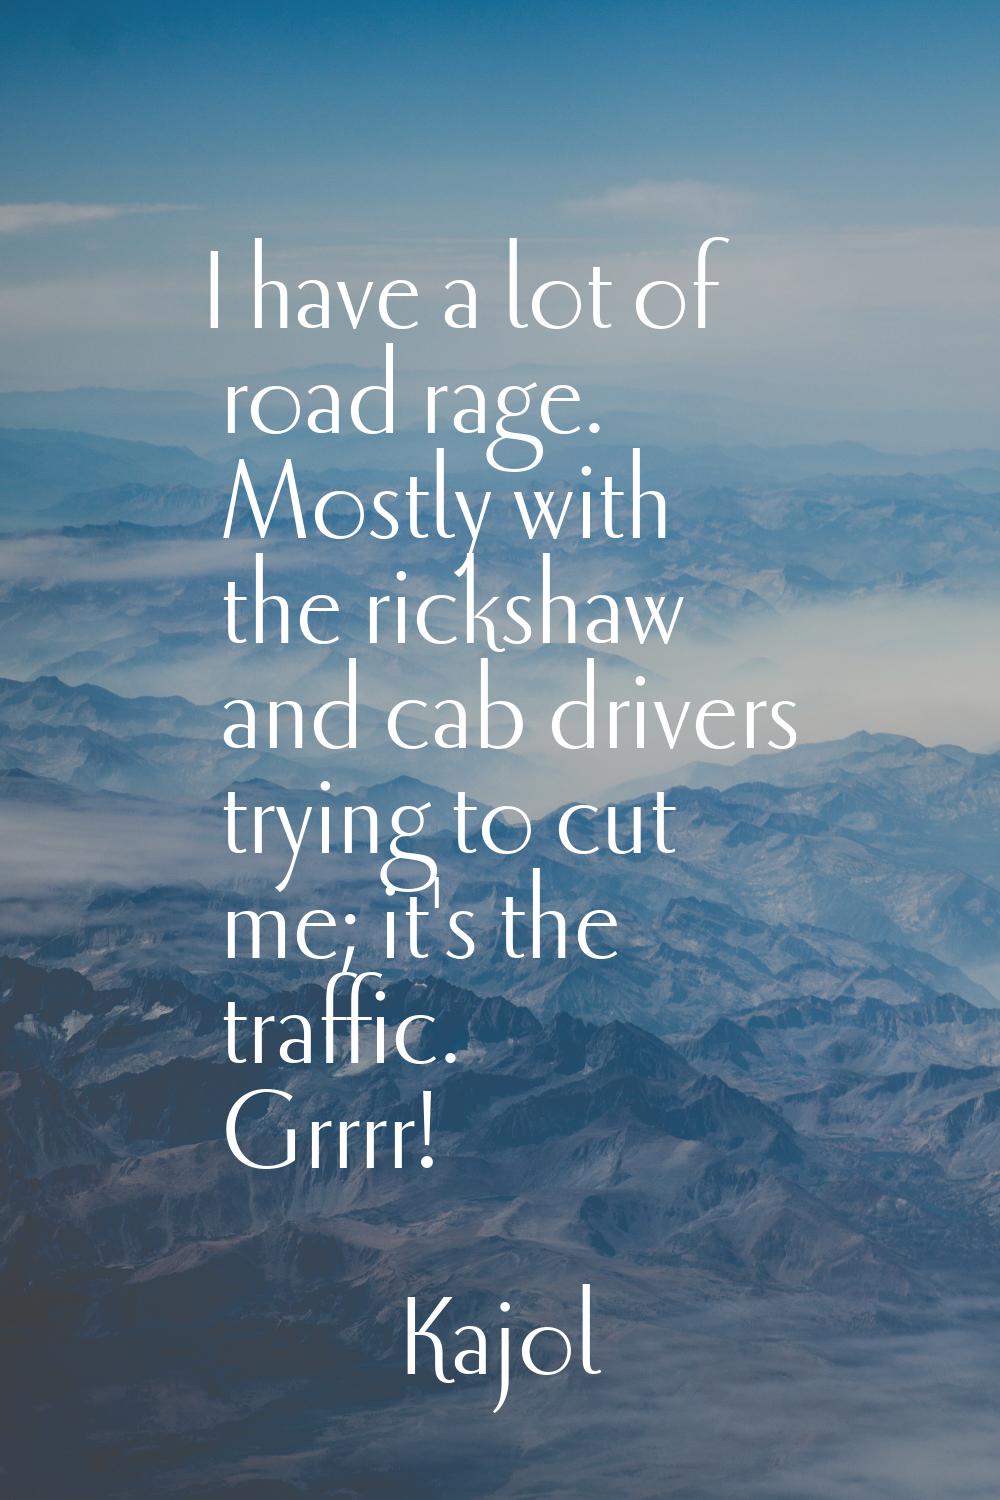 I have a lot of road rage. Mostly with the rickshaw and cab drivers trying to cut me; it's the traf